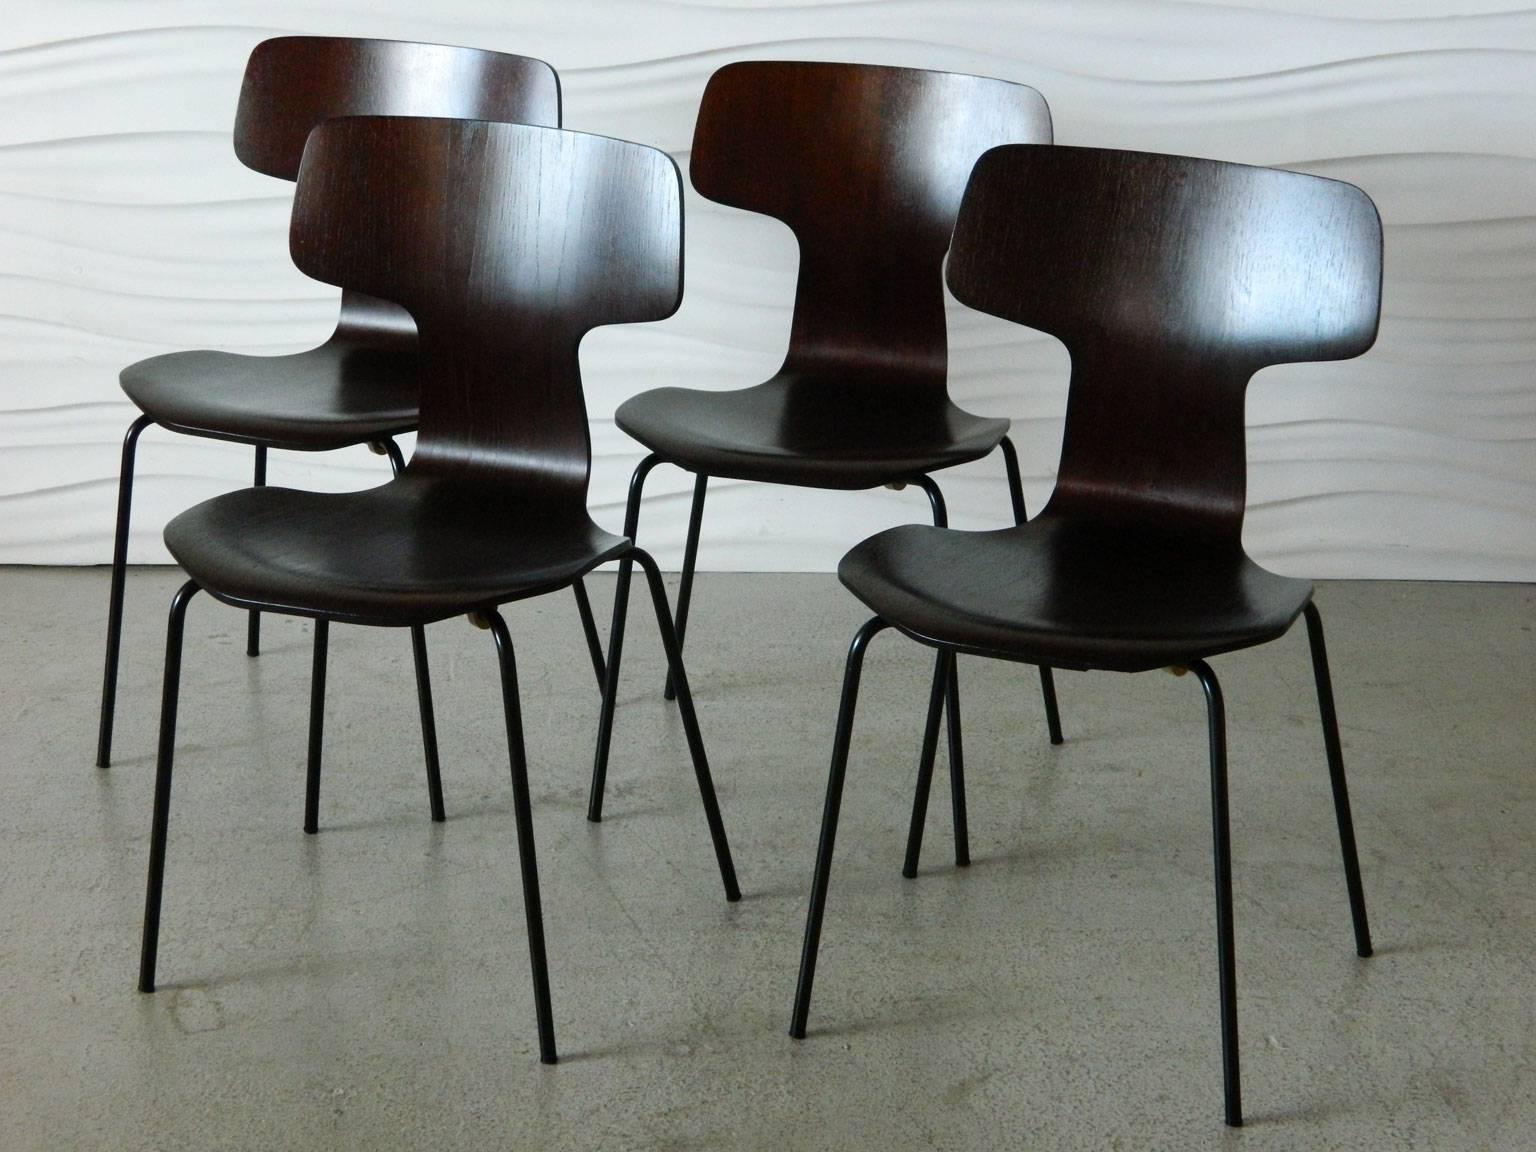 Set of Four Arne Jacobsen 3103 Chairs In Good Condition For Sale In Baltimore, MD